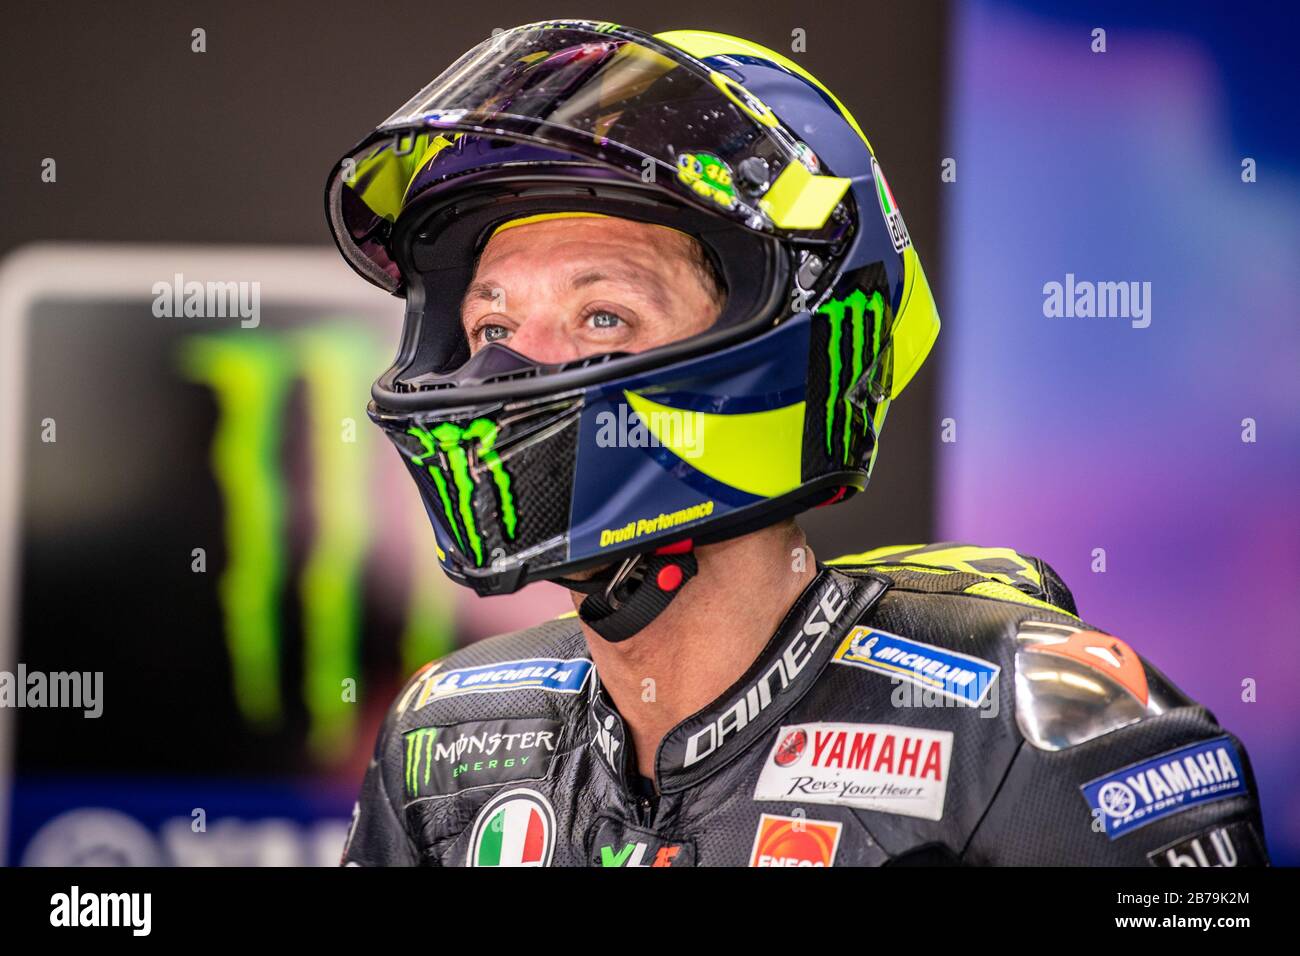 January 1, 2020, Italy, Italy: italy, Italy, , 01 Jan 2020, Italian MotoGP rider, number 46 Valentino Rossi, of the Yamaha Factory Racing during  -  - Credit: LM/Alessio Marini (Credit Image: © Alessio Marini/LPS via ZUMA Wire) Stock Photo